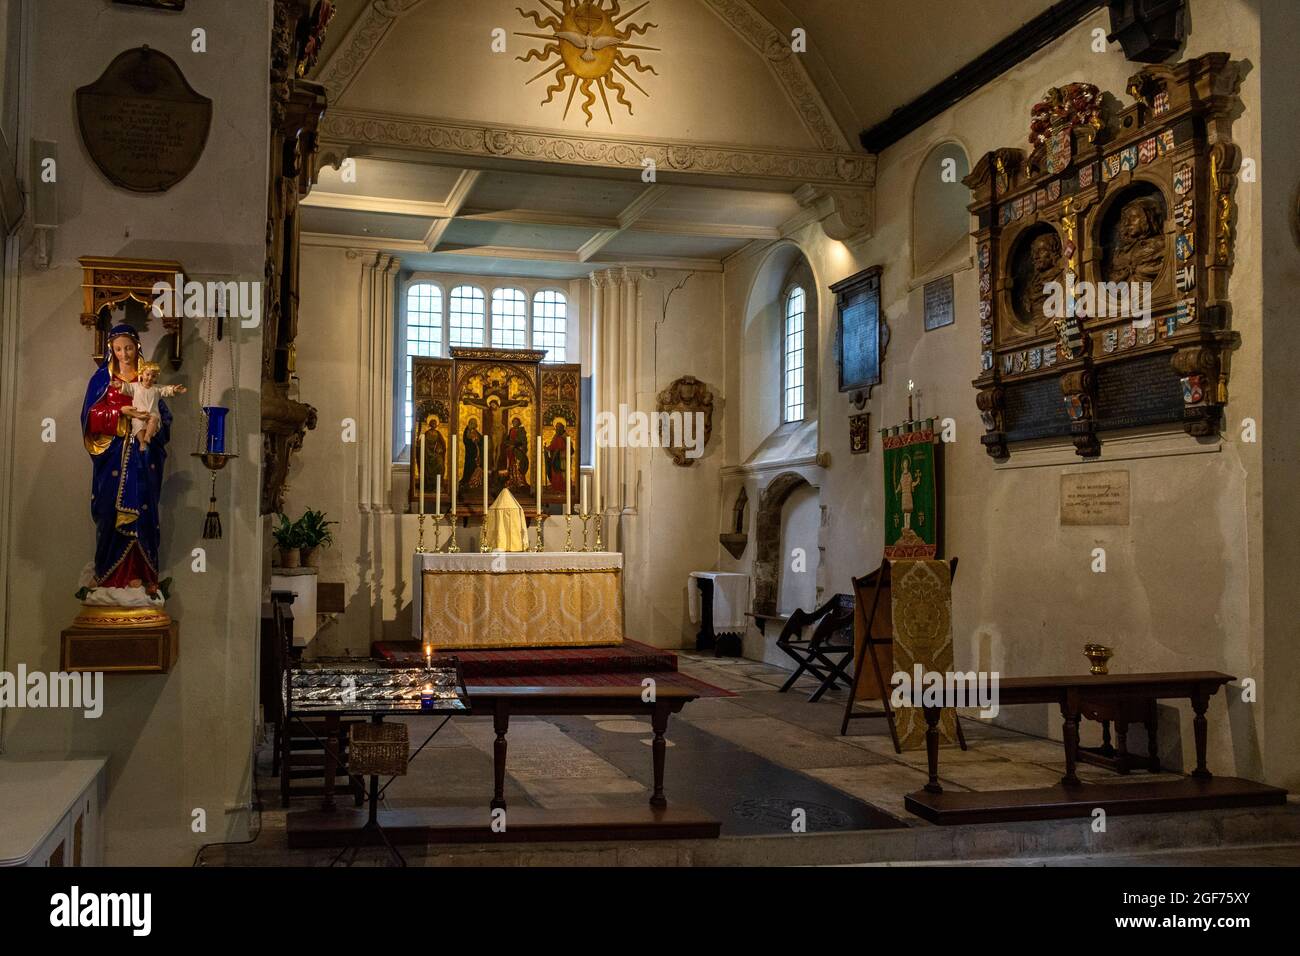 LONDON SOMERS TOWN SAINT PANCRAS OLD CHURCH AN INTERIOR VIEW OF CHANCEL AND ALTAR Stock Photo